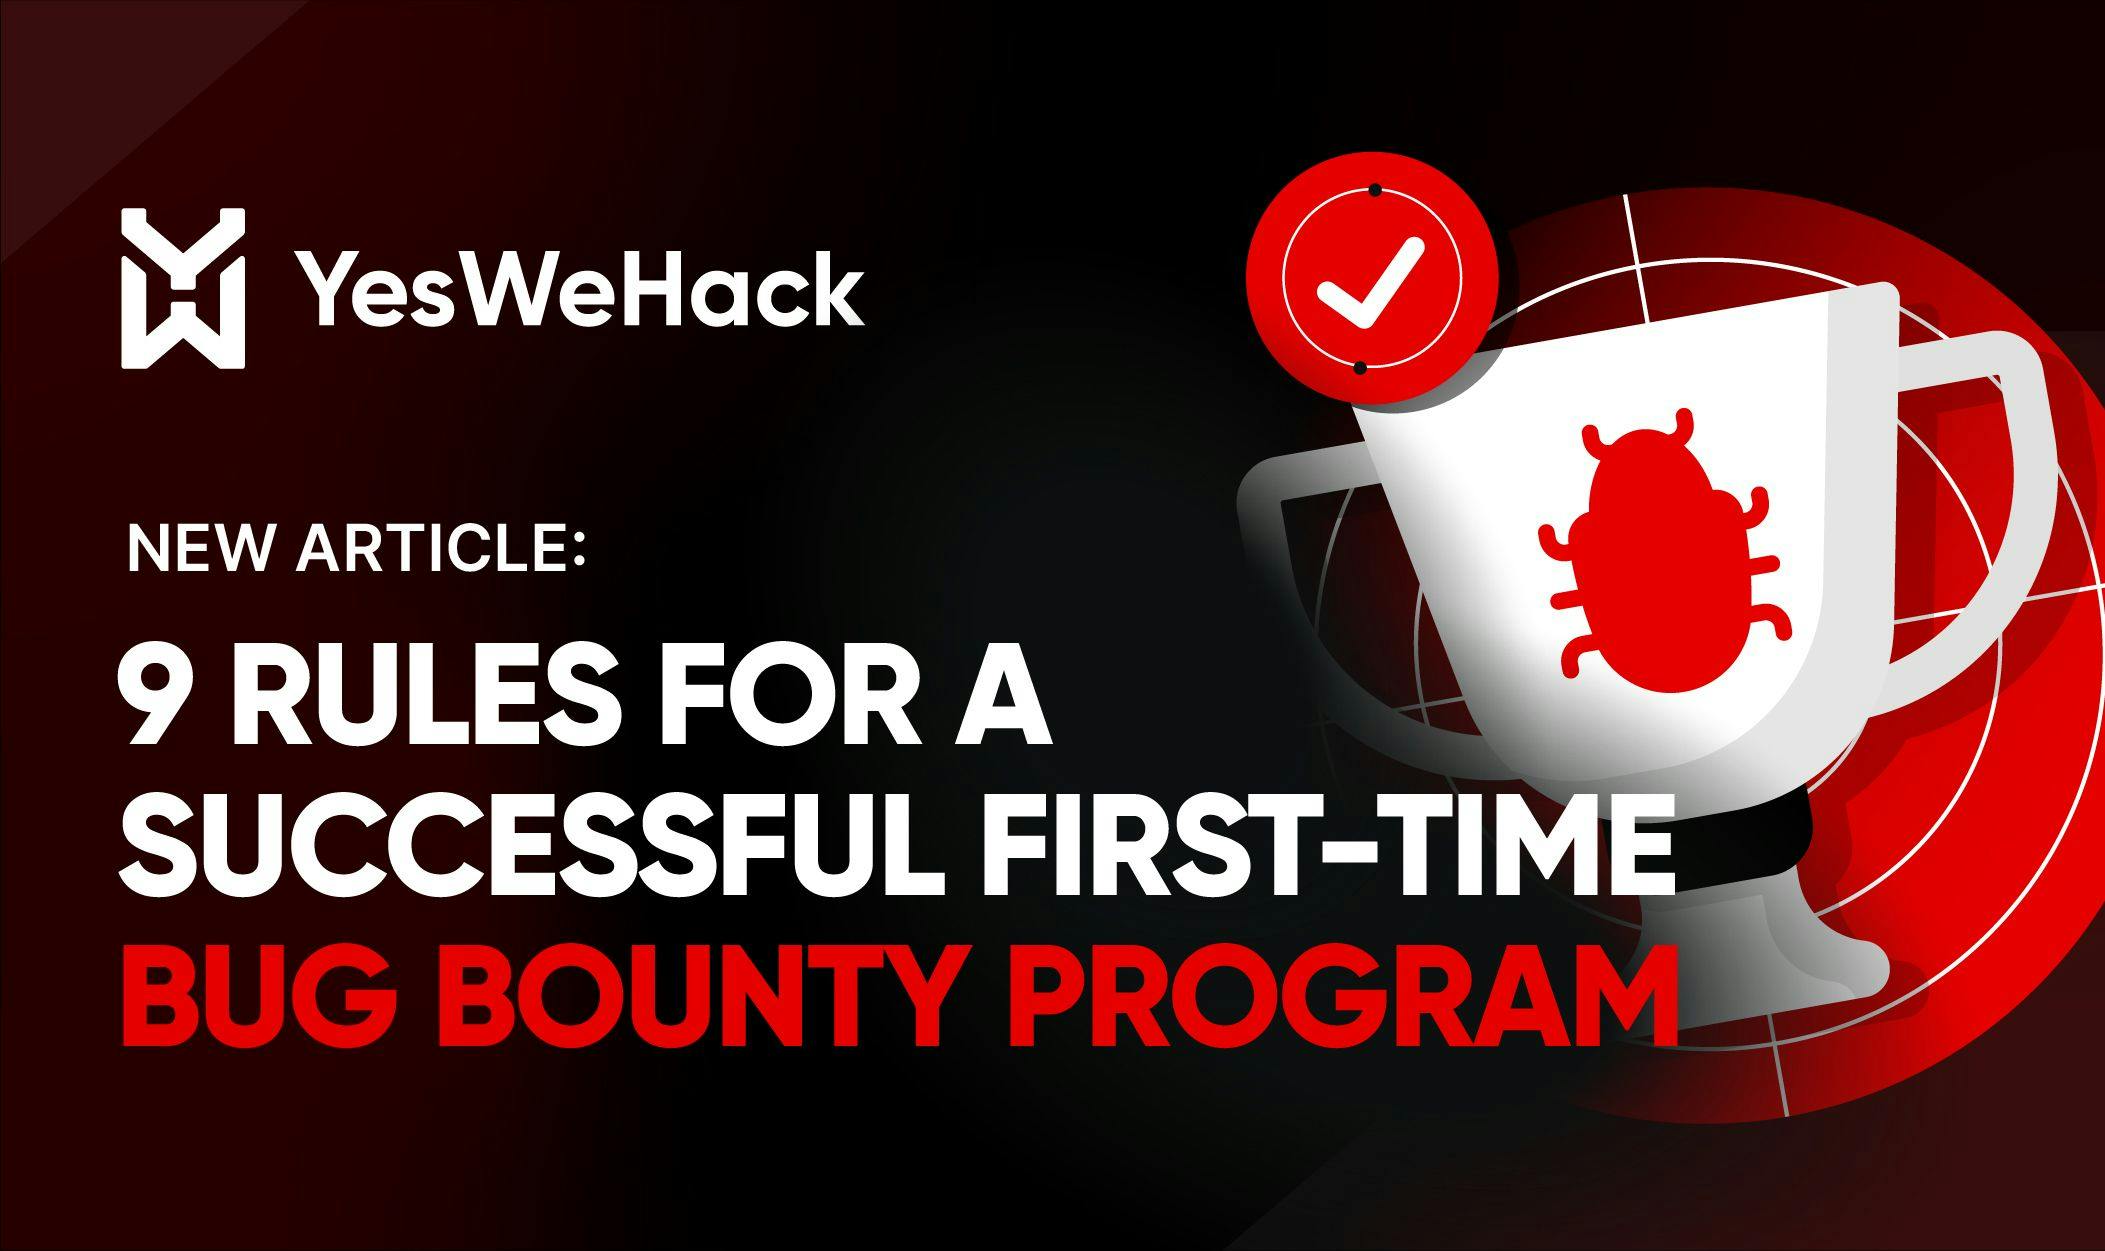 9 rules for a successful first-time Bug Bounty Program